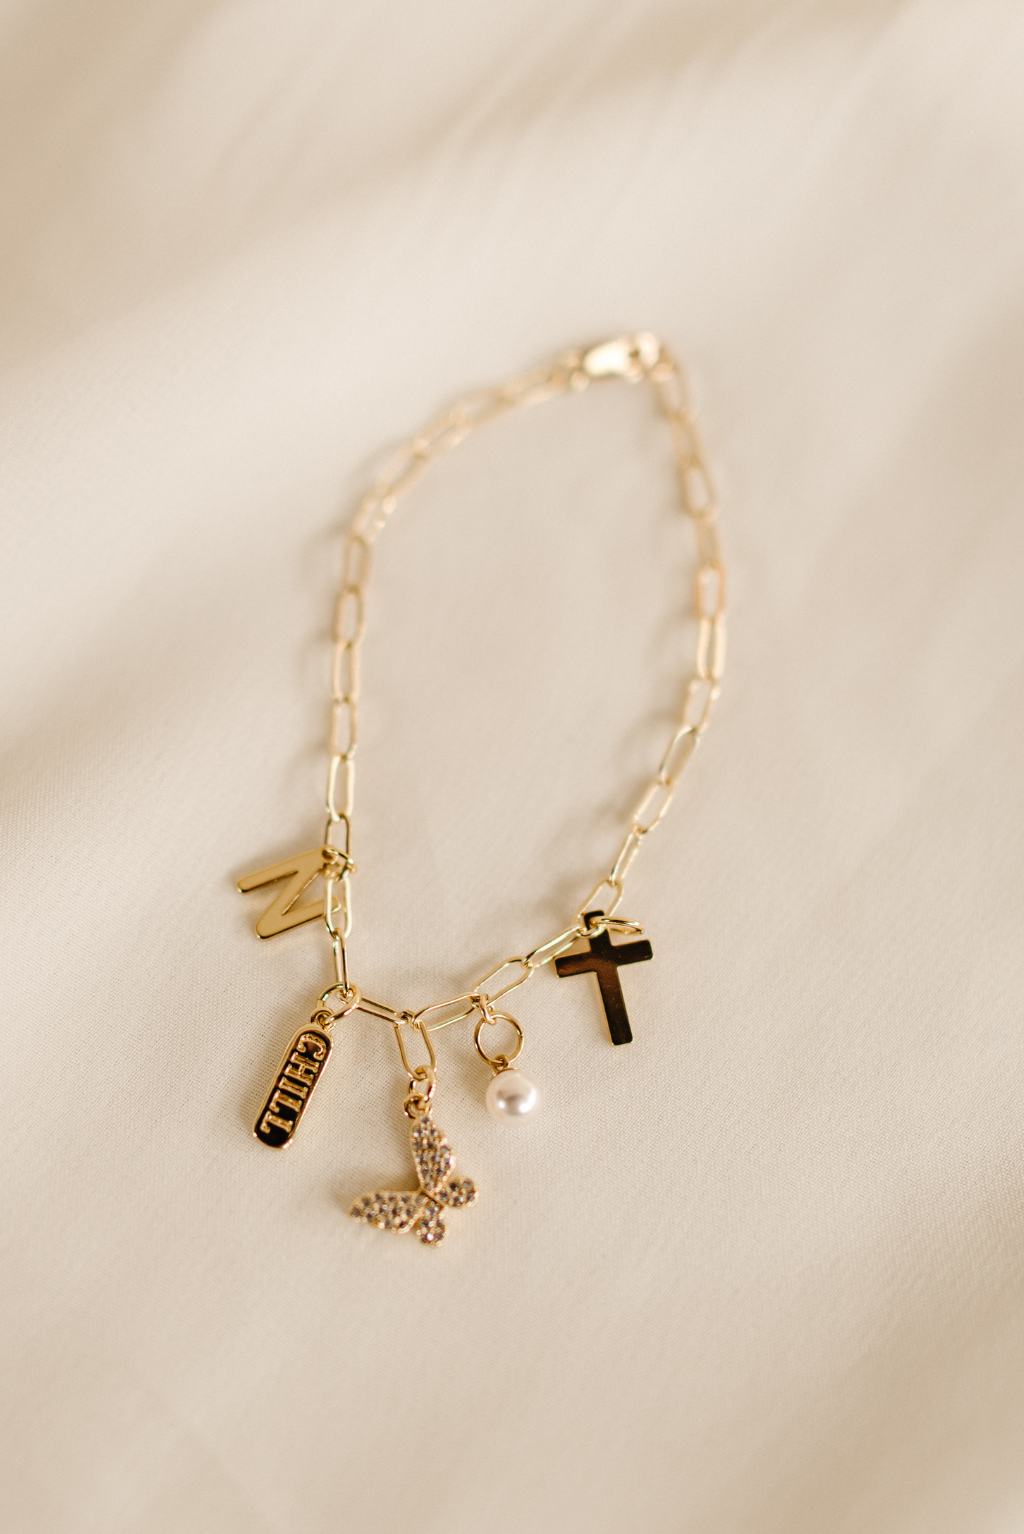 Buy beautiful and trendy Charm bracelet charms